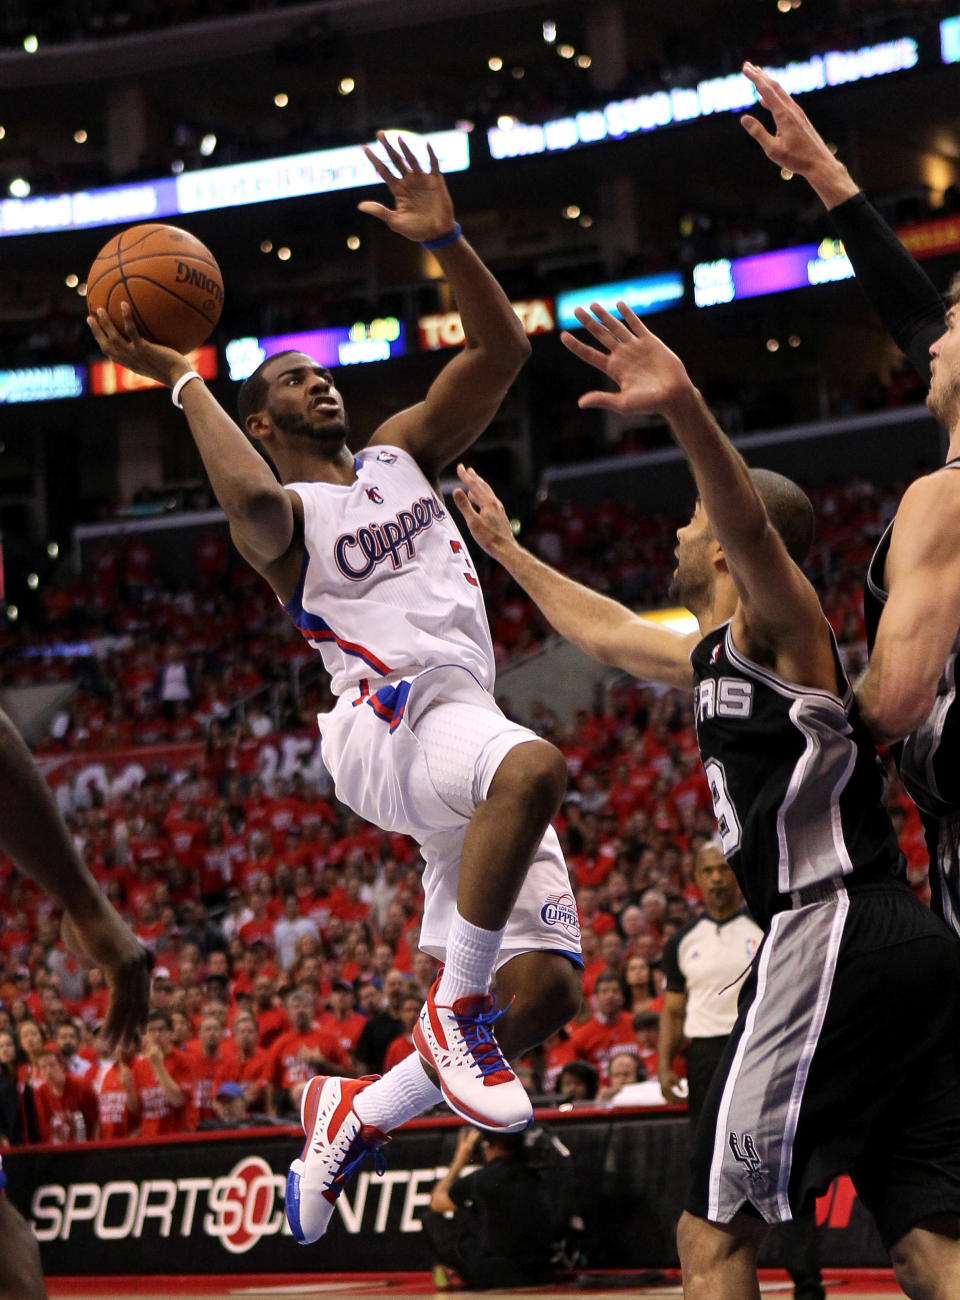 LOS ANGELES, CA - MAY 19: Chris Paul #3 of the Los Angeles Clippers goes up for a shot against Tony Parker #3 of the San Antonio Spurs in Game Three of the Western Conference Semifinals in the 2012 NBA Playoffs on May 19, 2011 at Staples Center in Los Angeles, California. The Spurs won 96-86 to take a three games to none lead in the series. NOTE TO USER: User expressly acknowledges and agrees that, by downloading and or using this photograph, User is consenting to the terms and conditions of the Getty Images License Agreement. (Photo by Stephen Dunn/Getty Images)